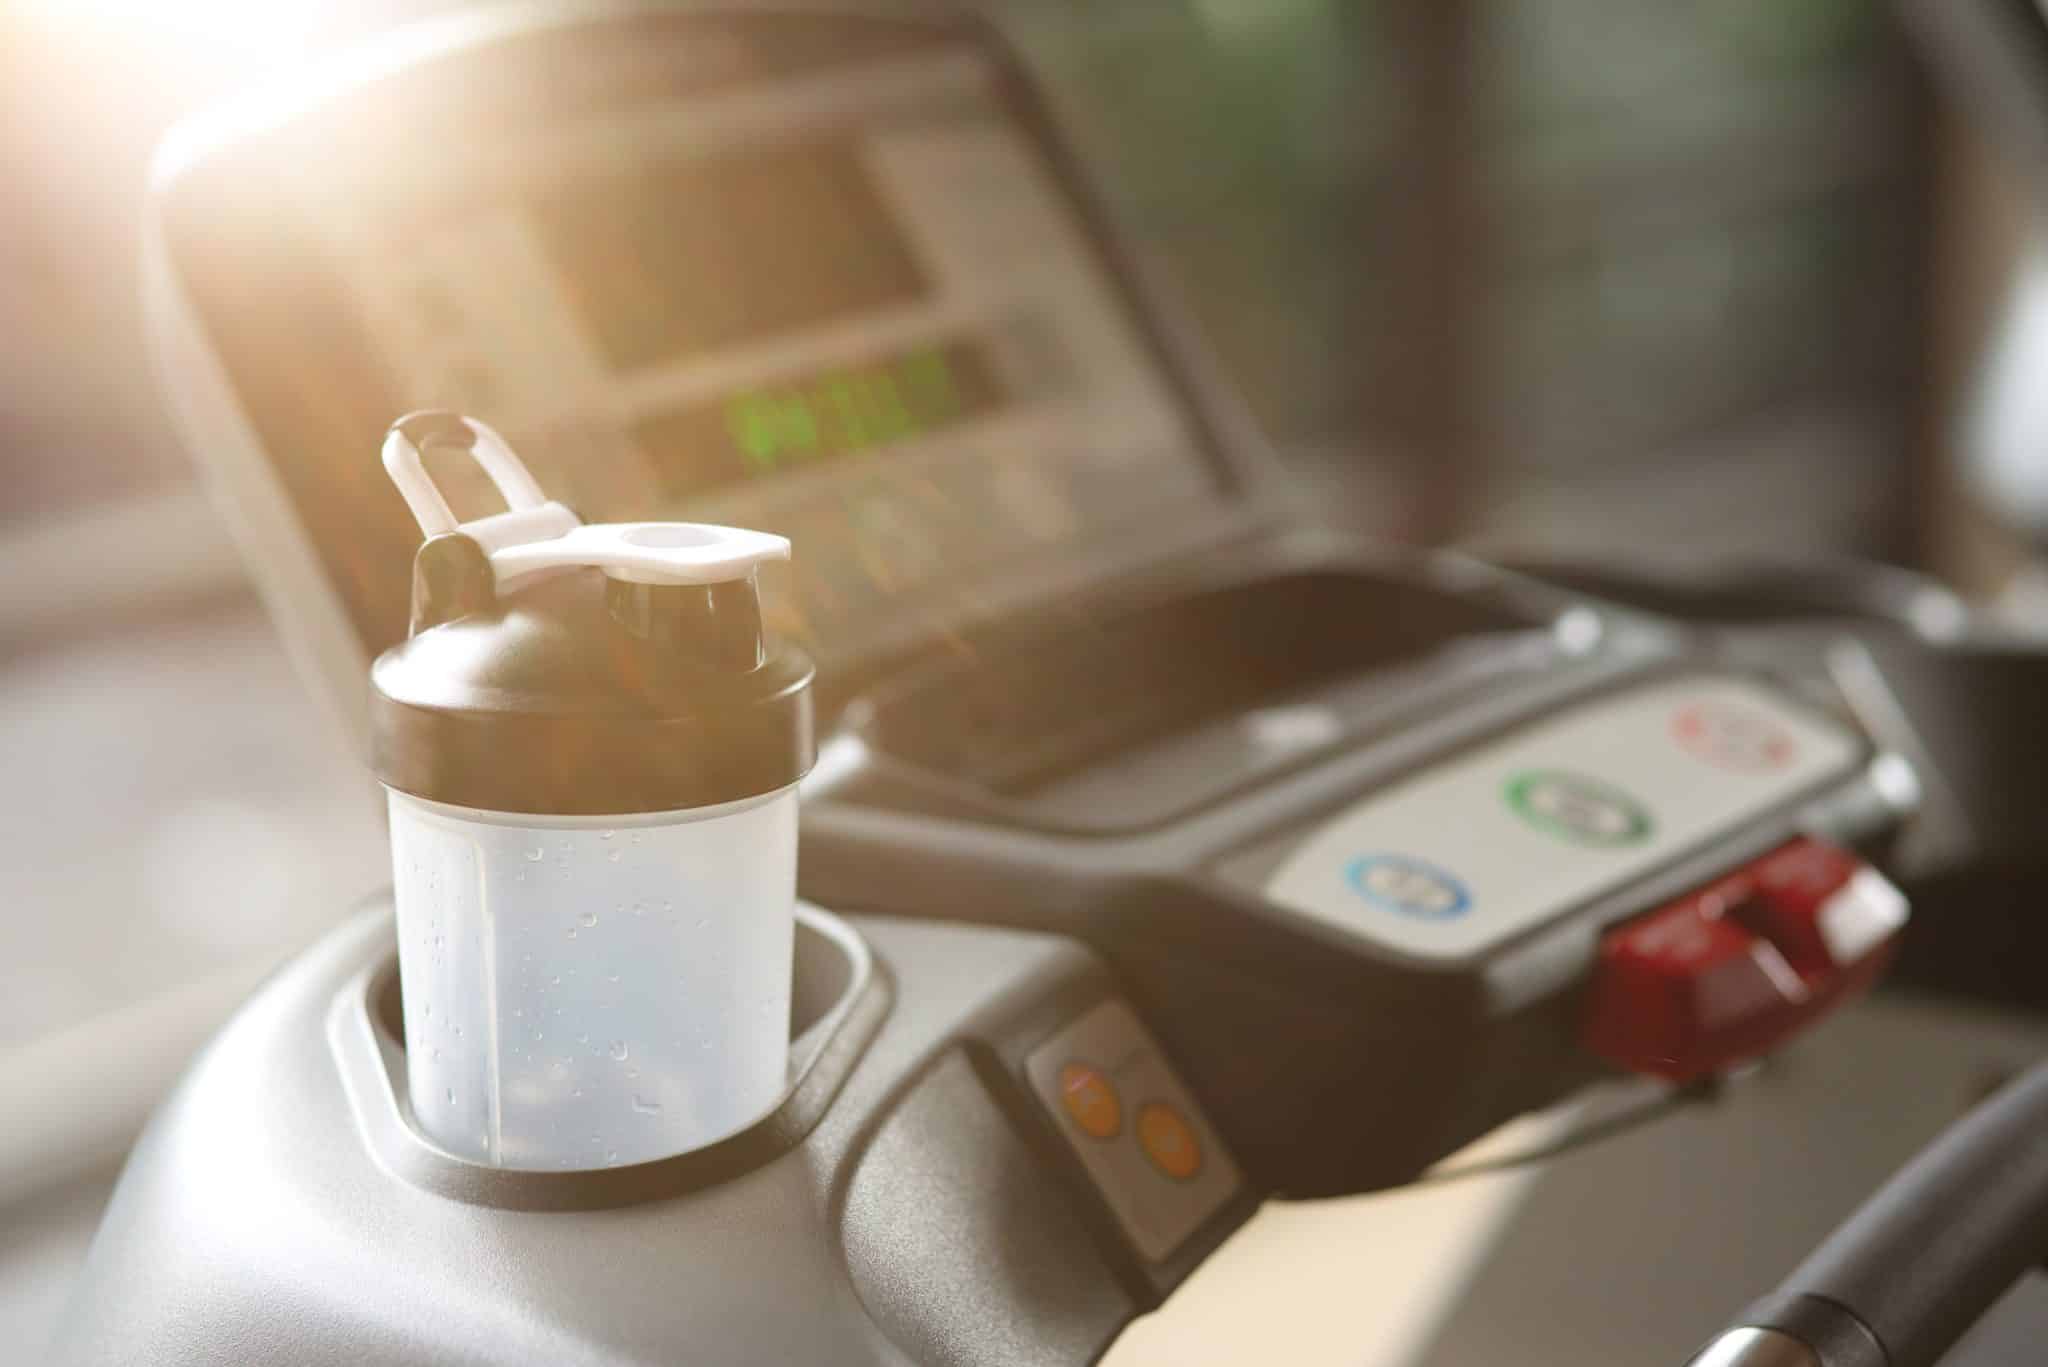 A treadmill with a shaker bottle in the cup holder.